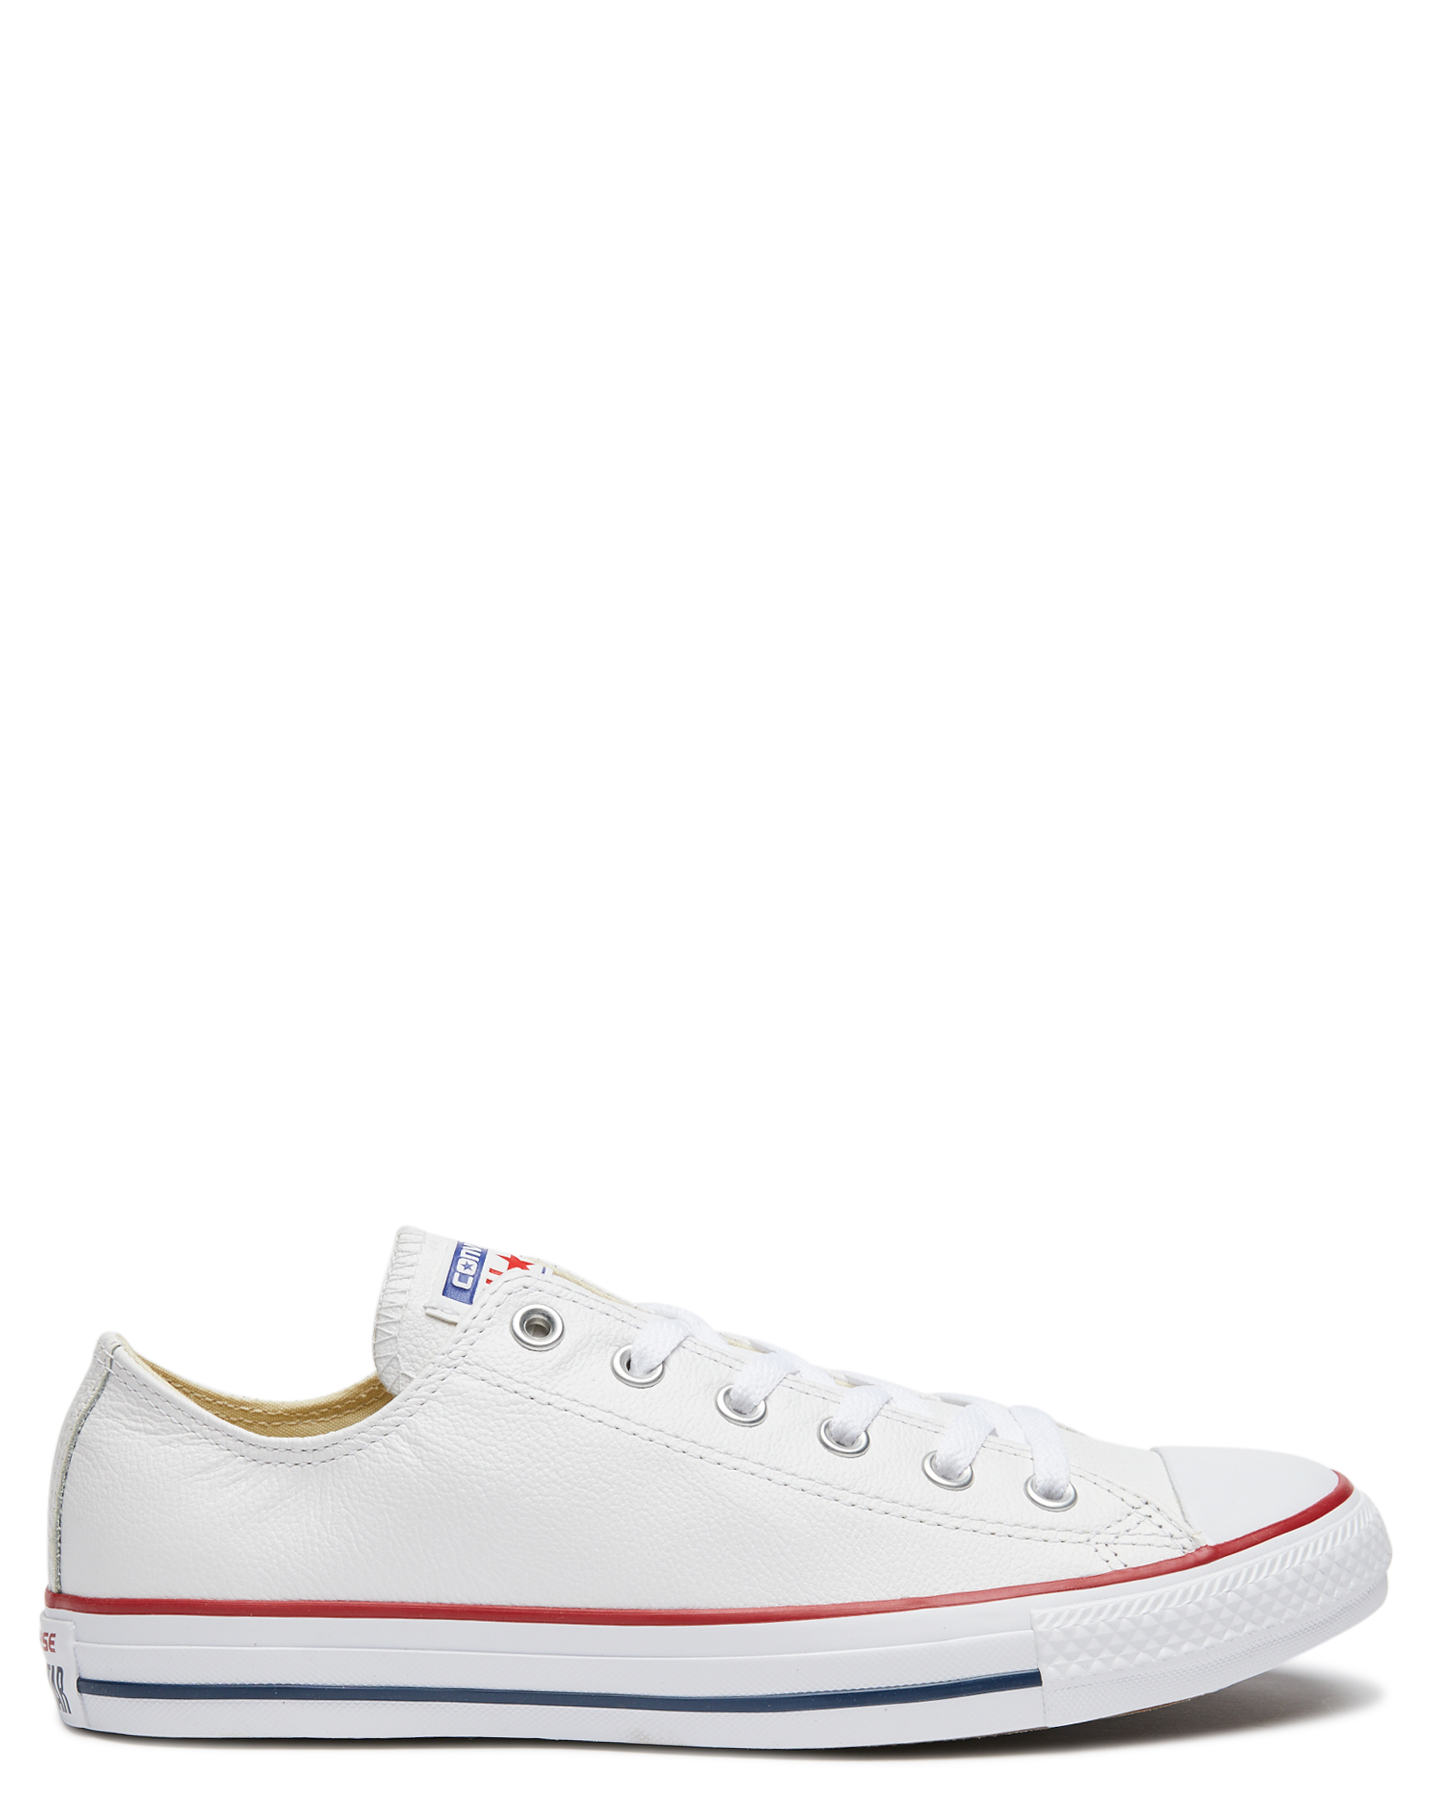 converse all star shoes 